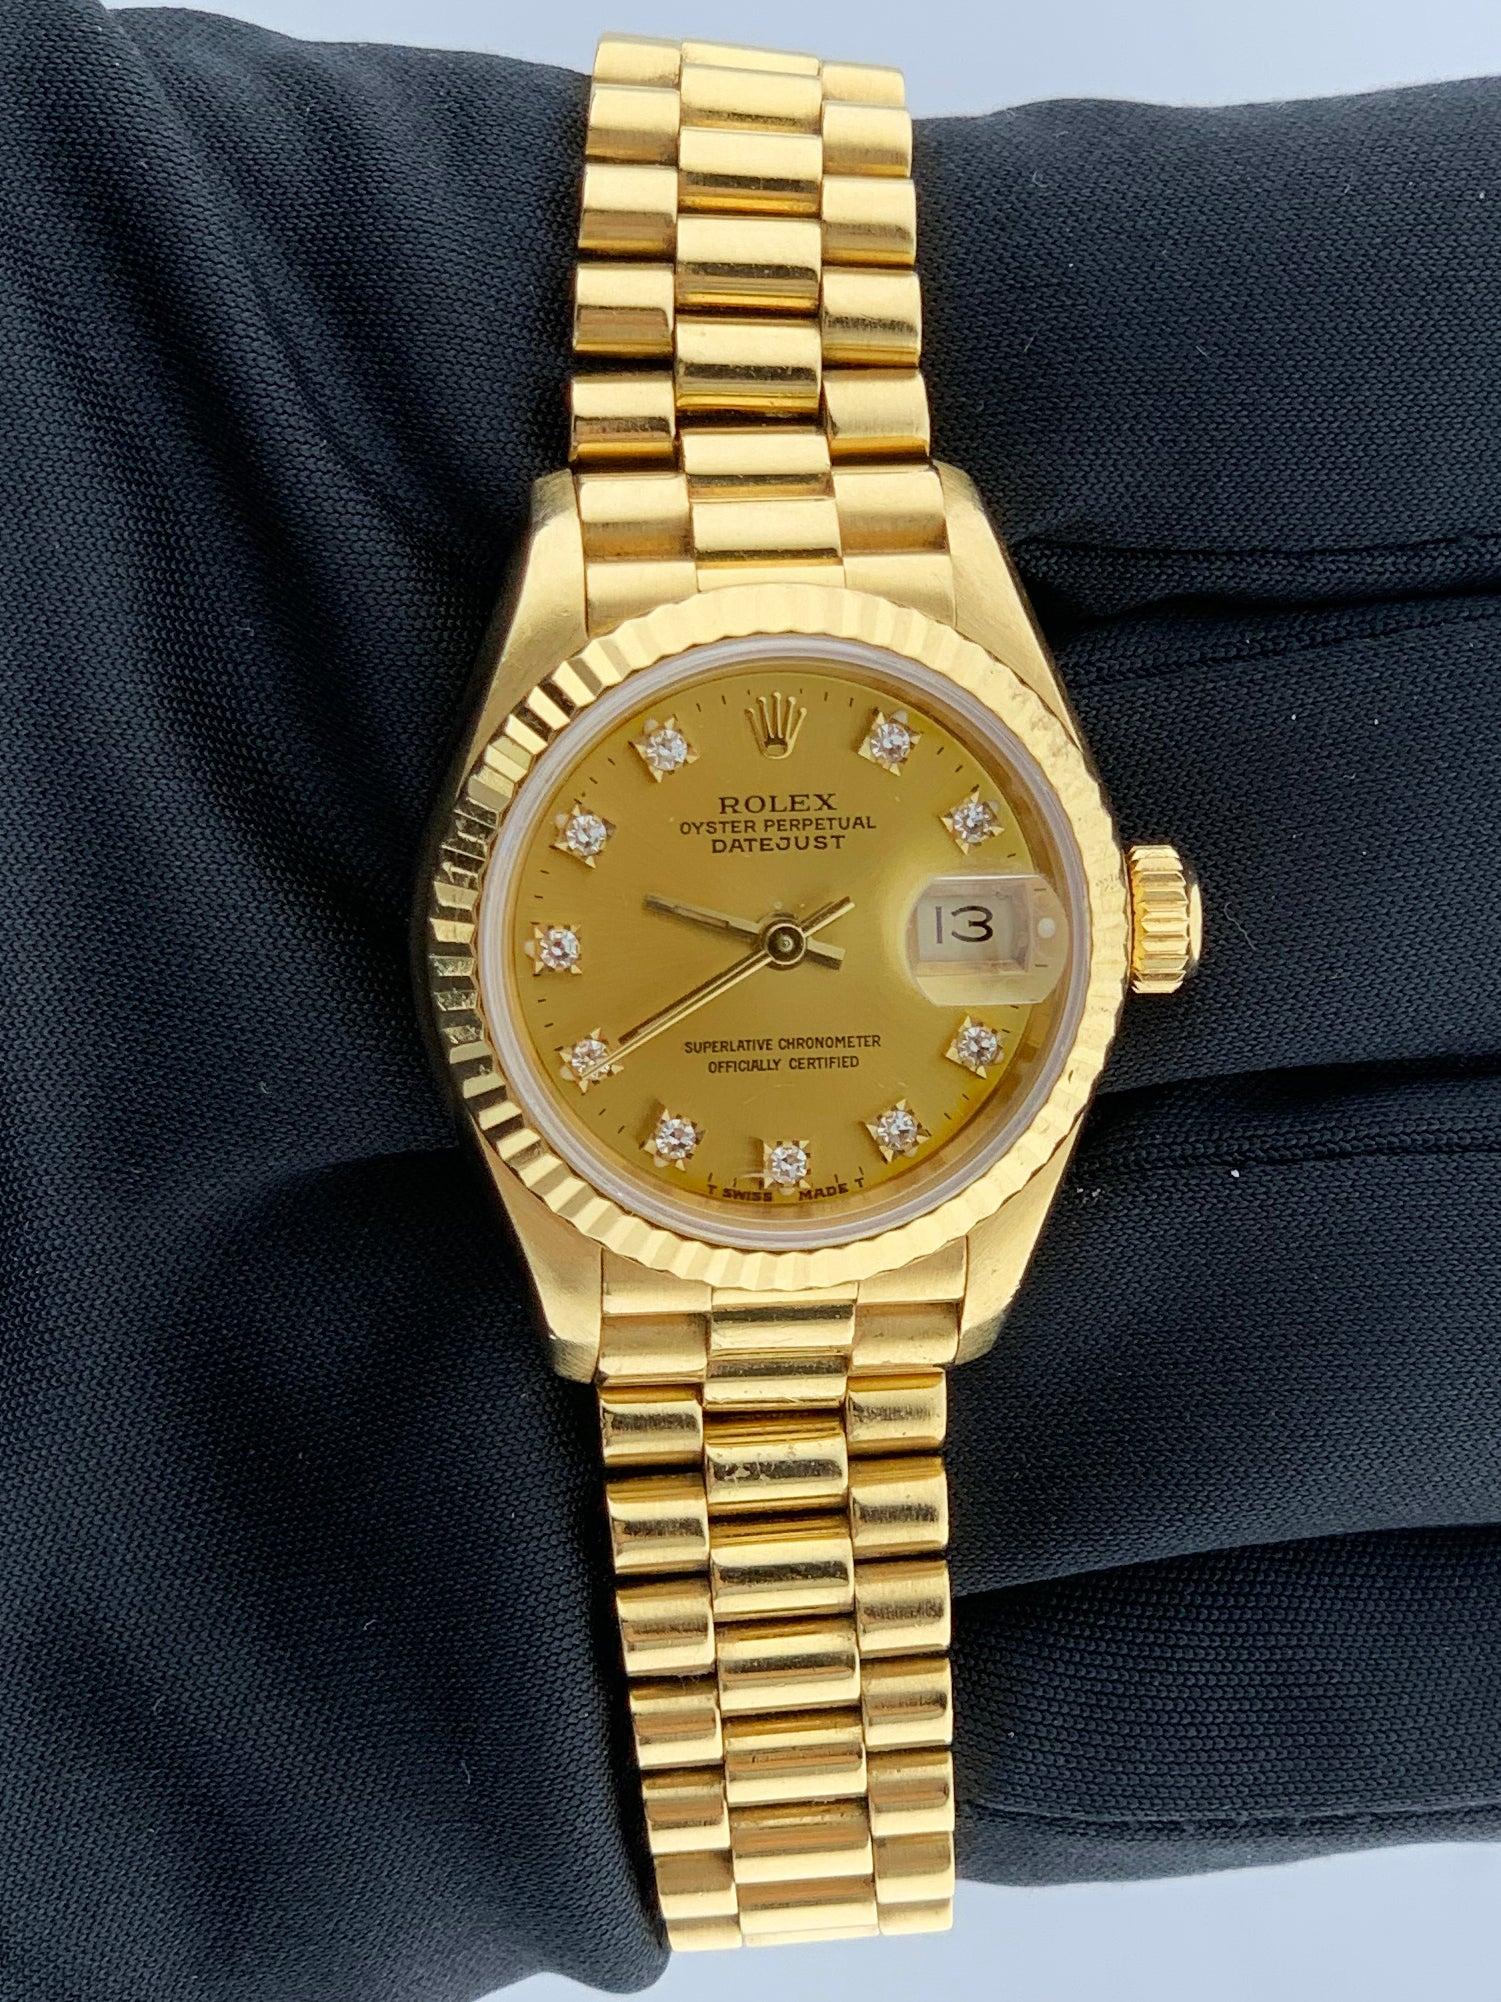 Rolex Oyster Perpetual Datejust 69178 ladies watch. 26mm 18K yellow gold case with a fluted bezel. Champagne dial with gold hands and original factory diamond set hour markers. 18K yellow gold president bracelet with 18K yellow gold hidden fold over